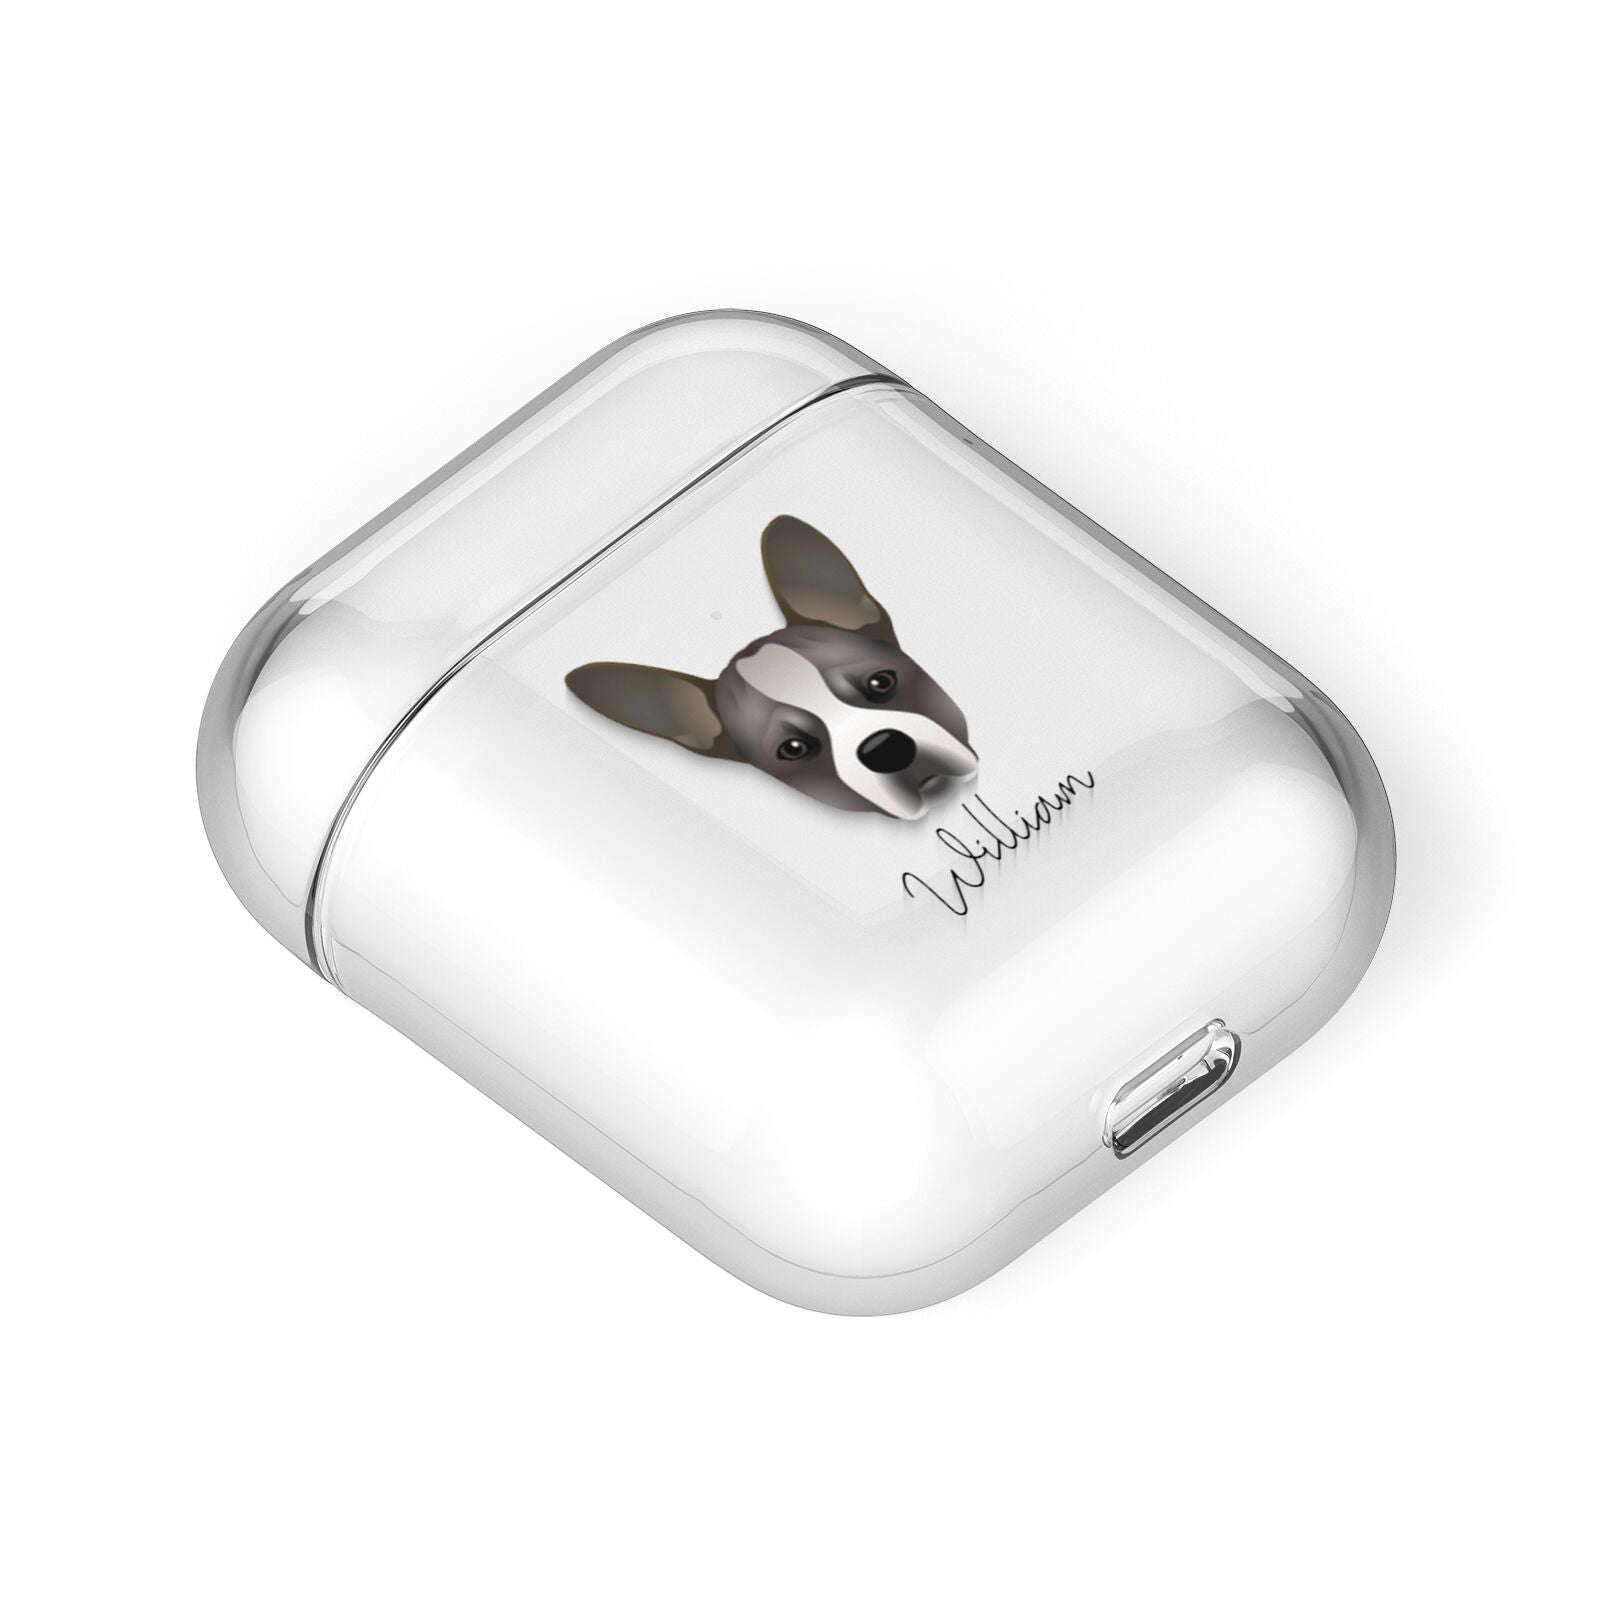 French Bull Jack Personalised AirPods Case Laid Flat